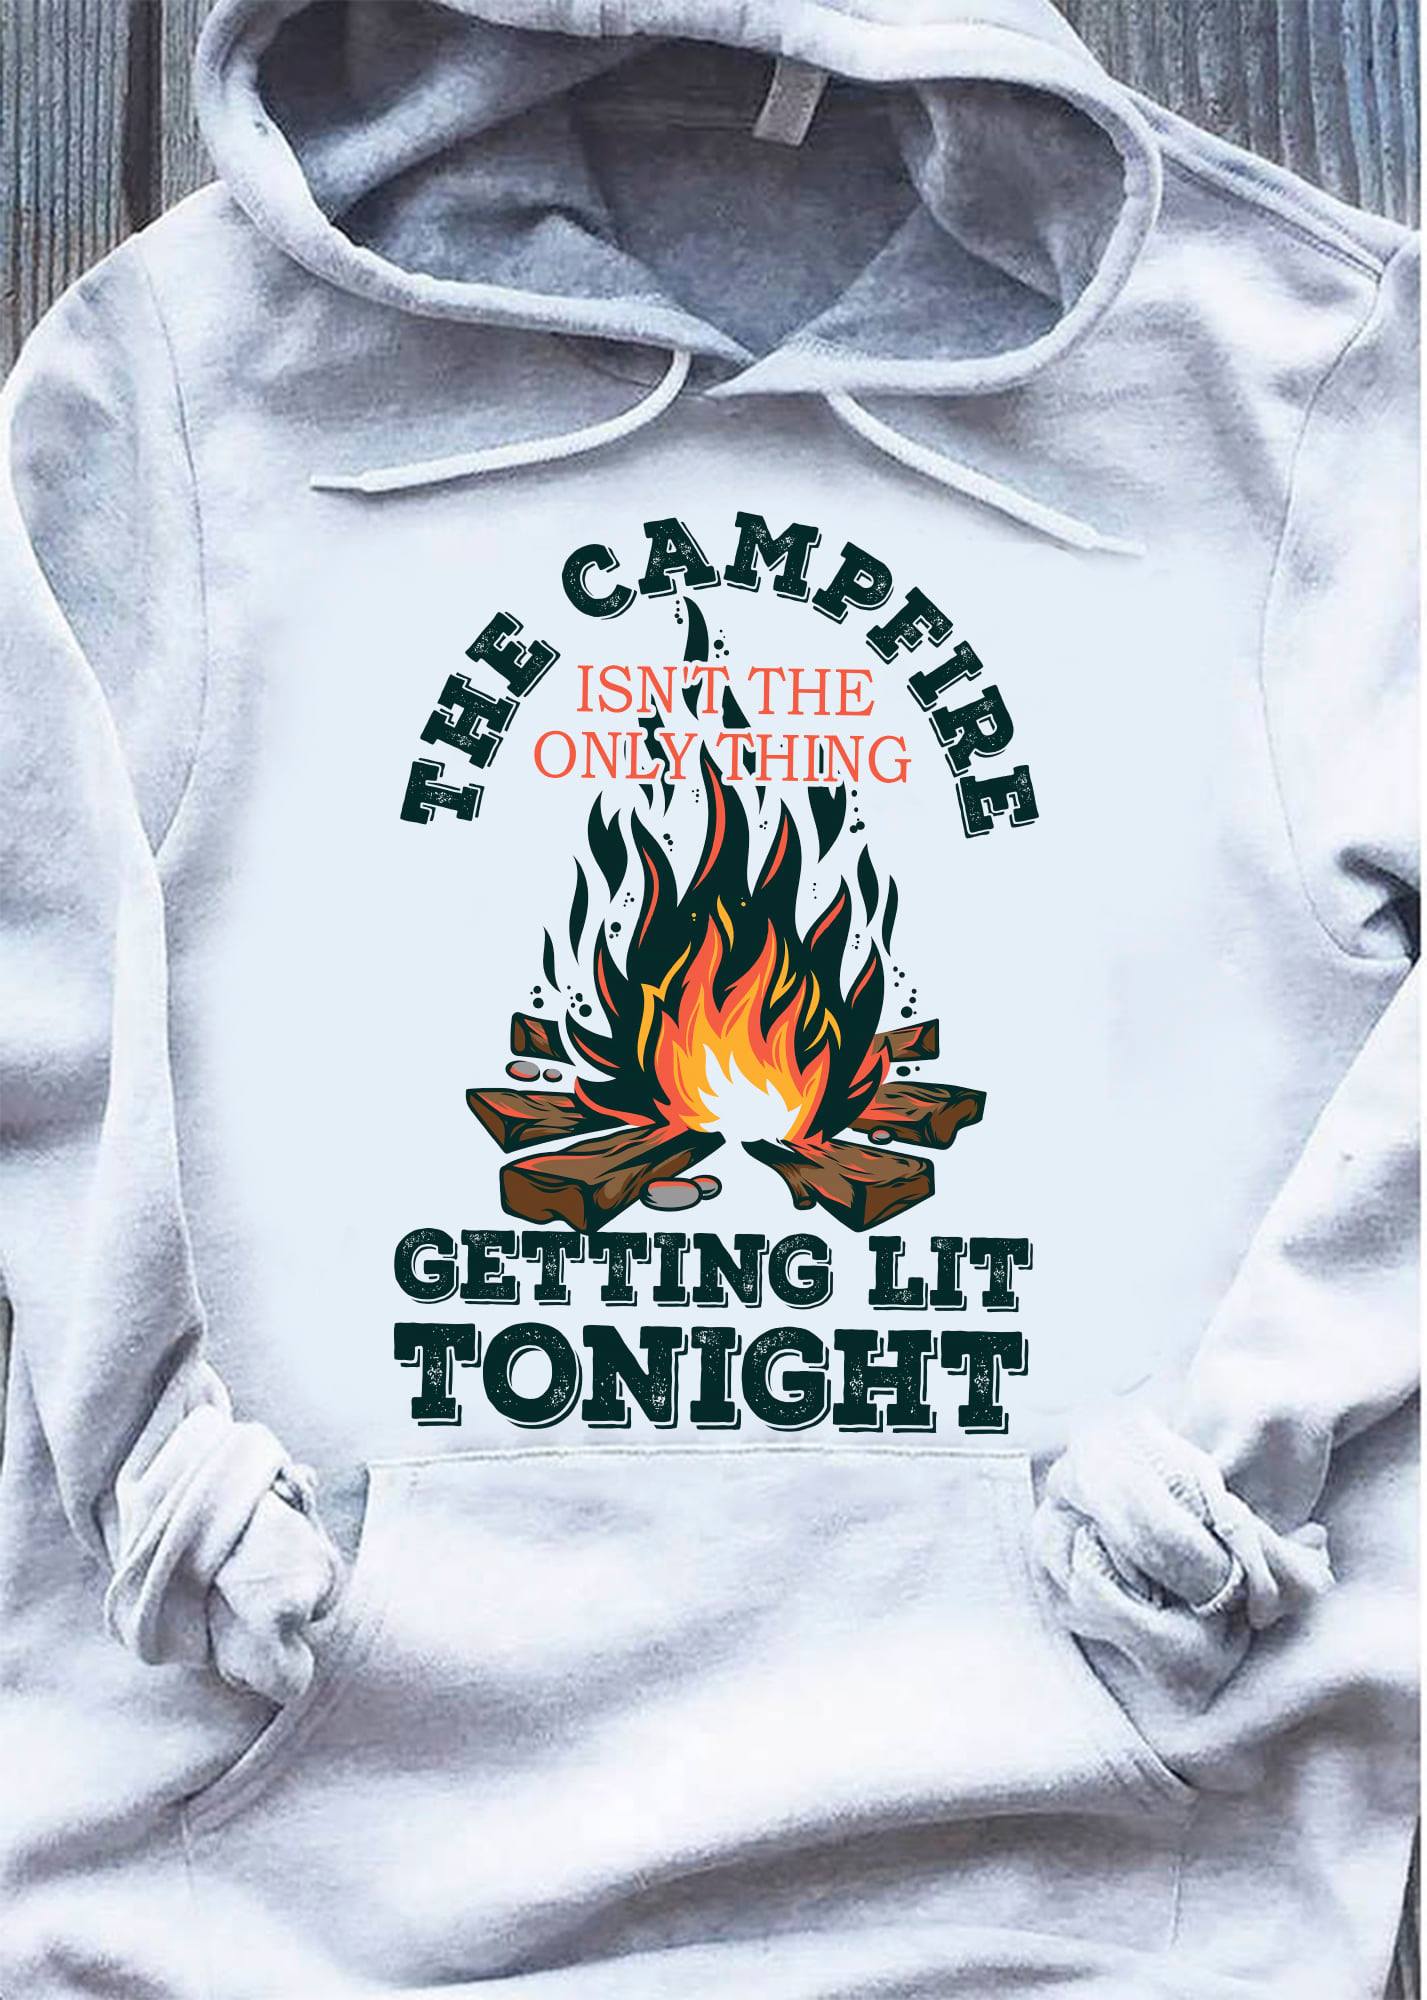 The campfire isn't the only thing getting lit tonight - Camping the hobby, T-shirt for camping person